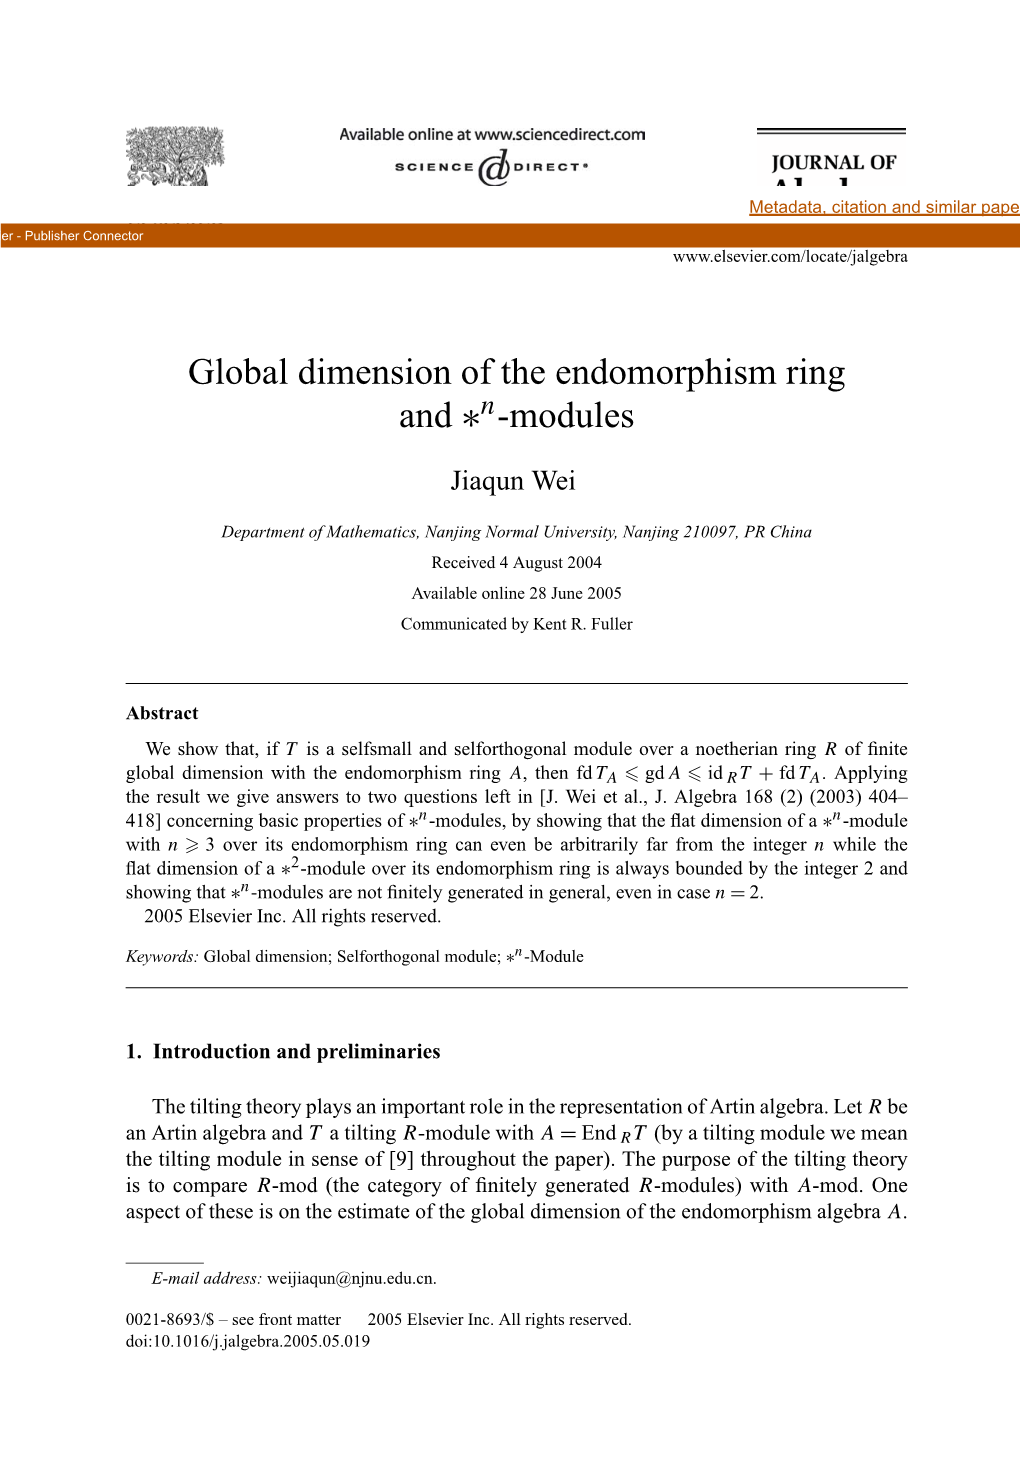 Global Dimension of the Endomorphism Ring and ∗ -Modules